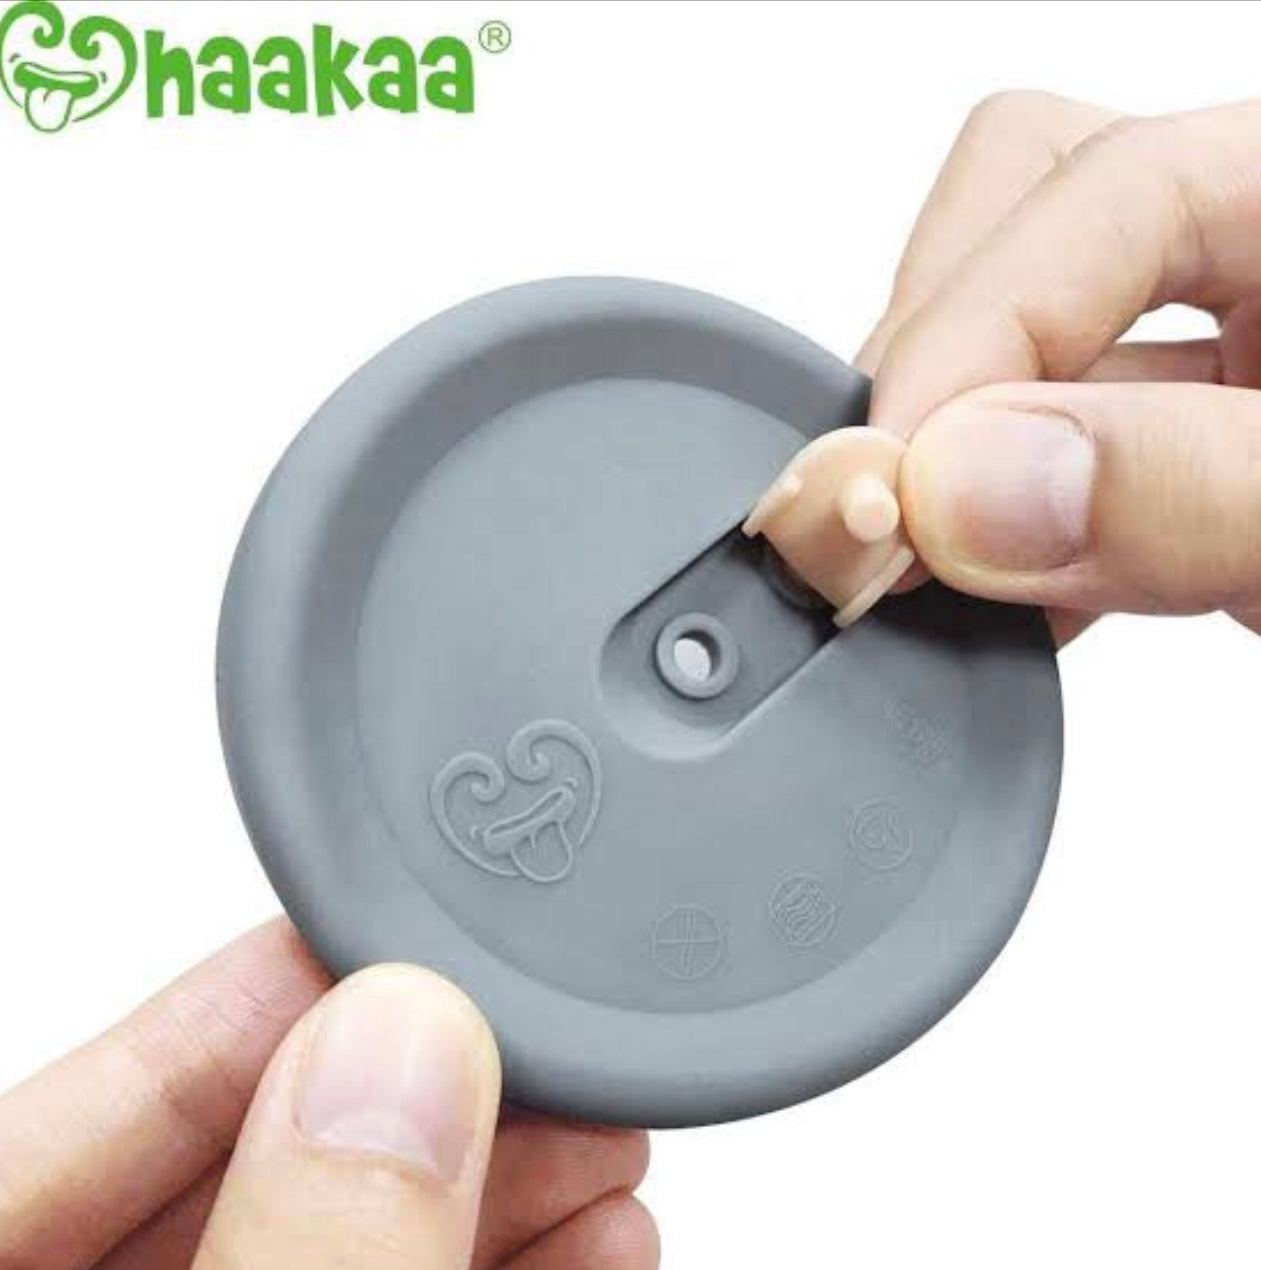 Haakaa - 100ml Silicone Pump and Silicone Cap Combo